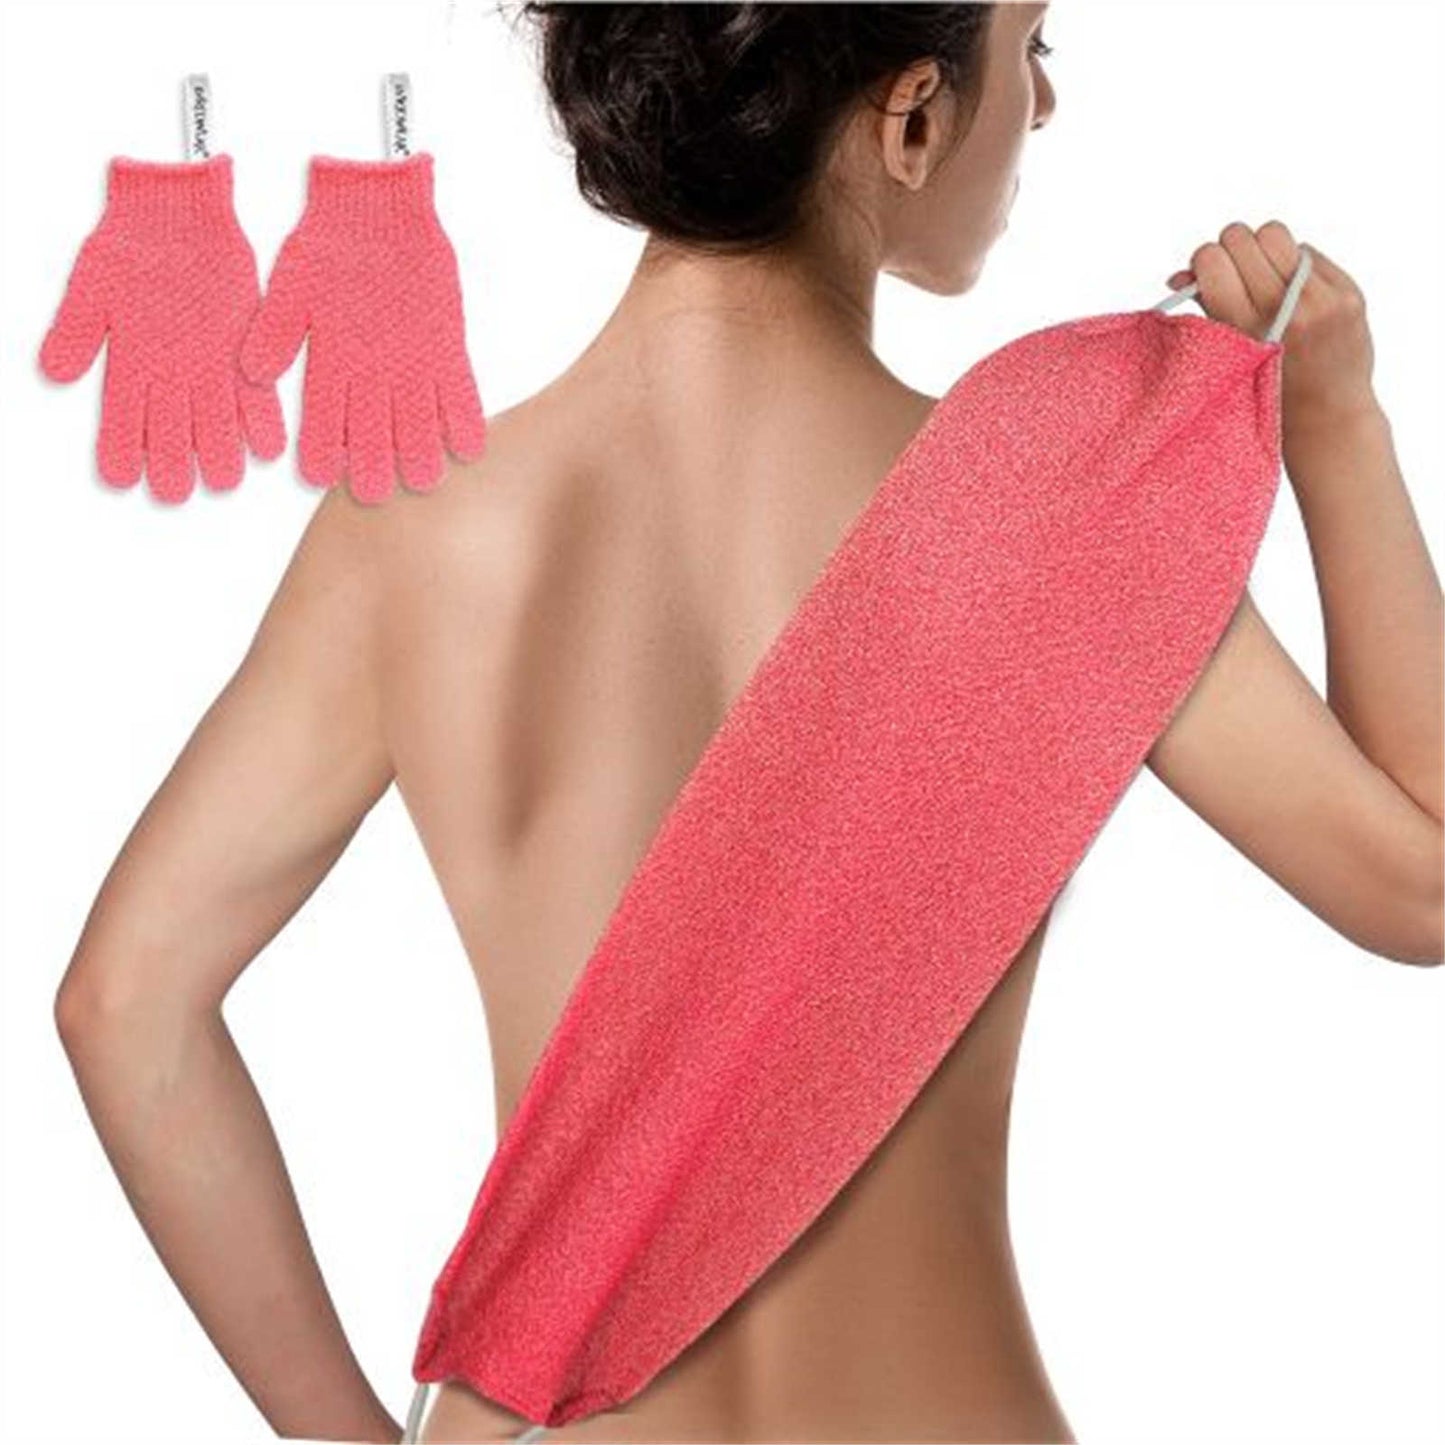 EvridWear Exfoliating Back Scrubber and Bath Gloves Set for Shower One Size (Pink Set)